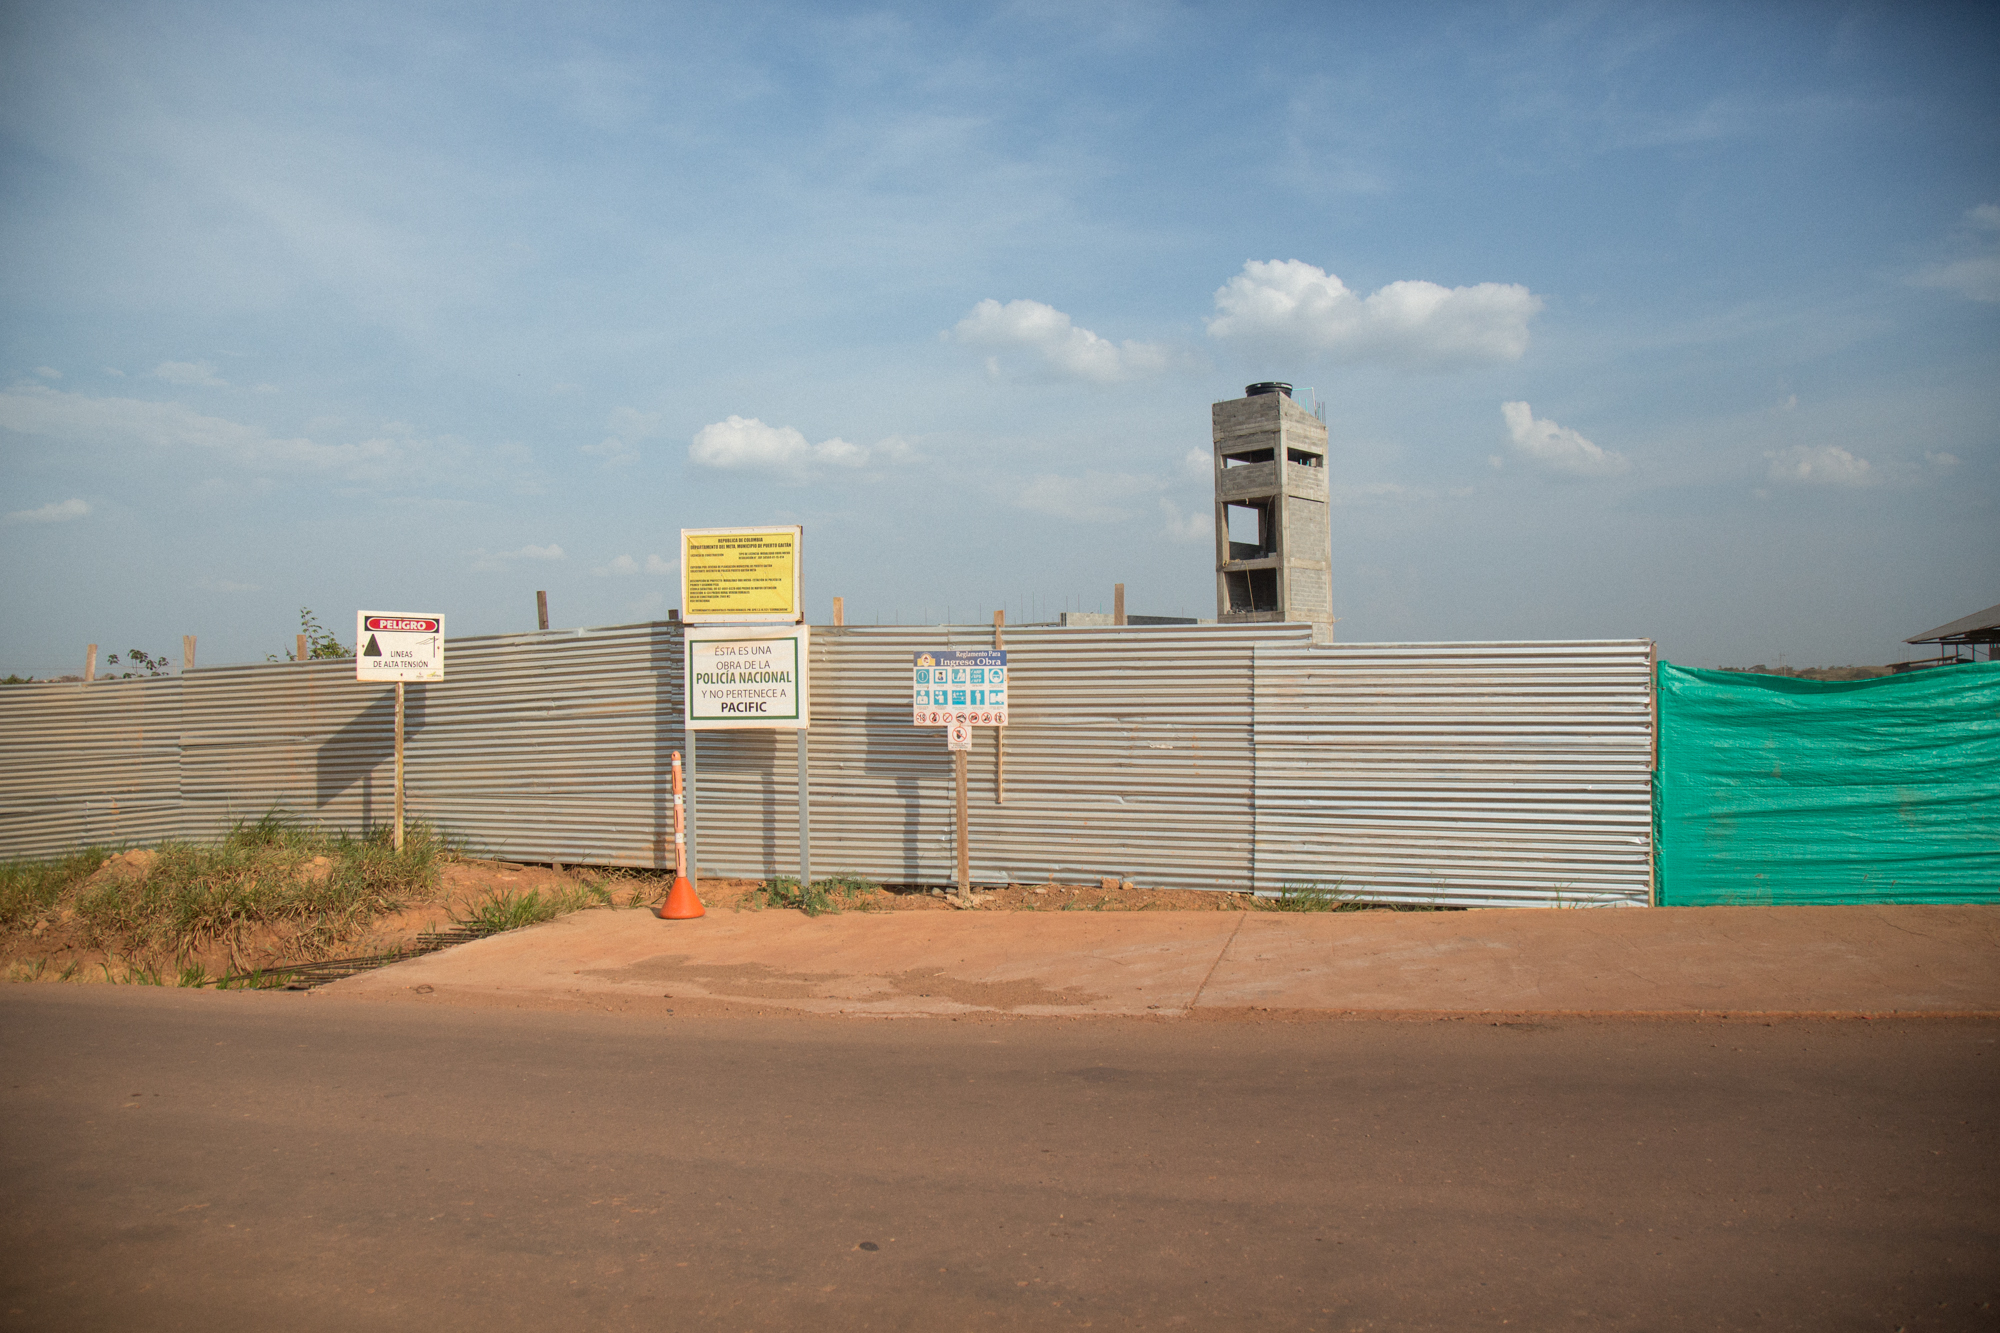  In front of a construction site where a new police station will be built, a sign clearly reads "This is a work of the national police and does not belong to Pacifc Rubiales" the former oil company which sold its shares to Ecopetrol.&nbsp;Rubiales, P